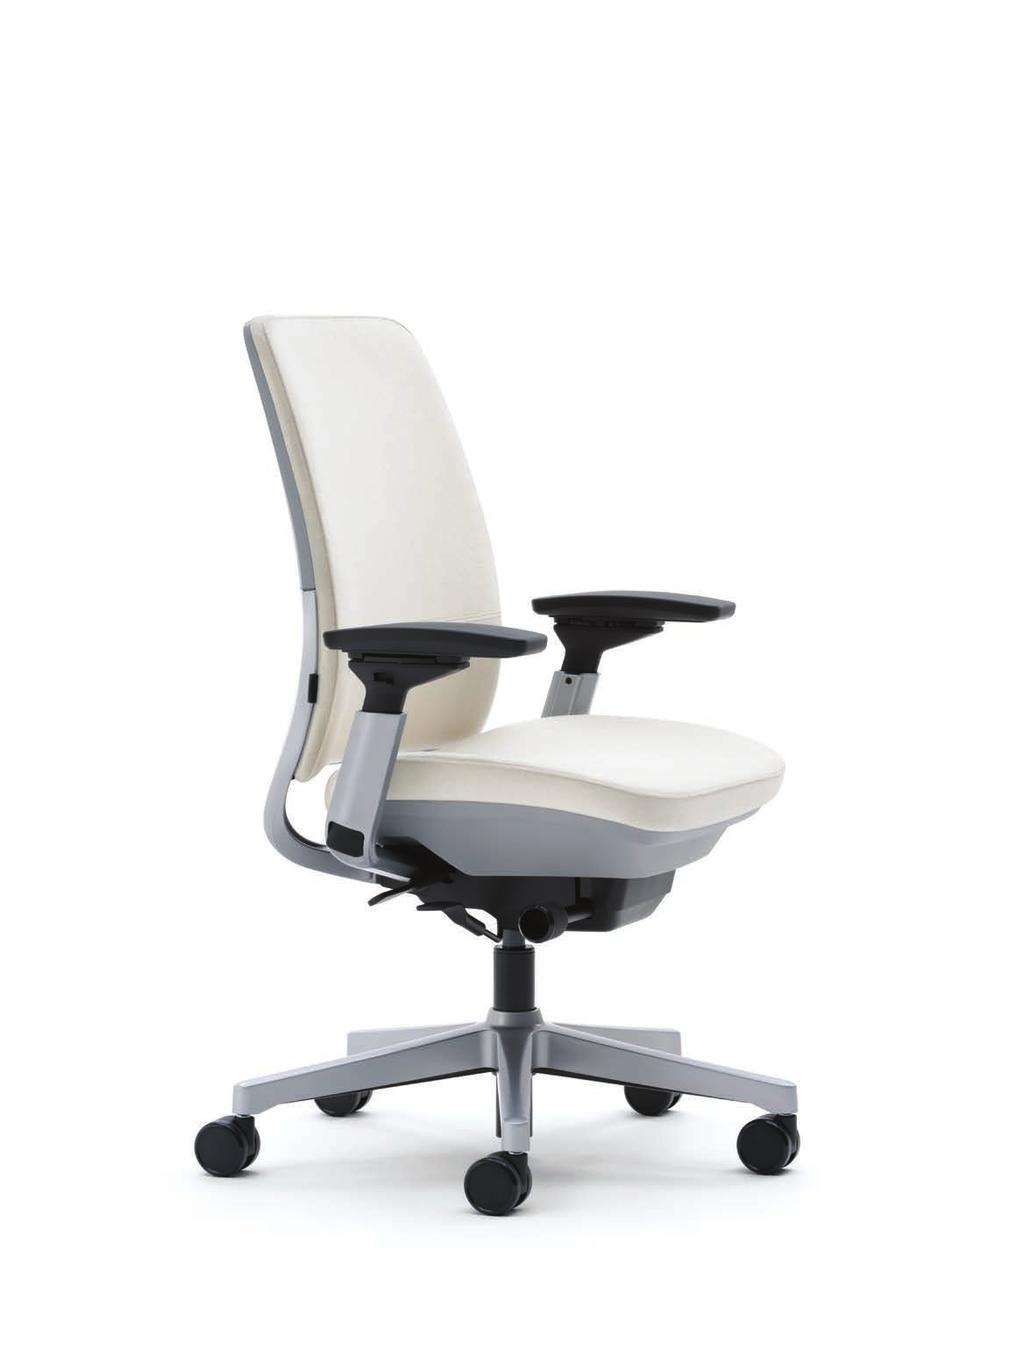 SEATING SOLUTIONS Leap task seating Amia executive task